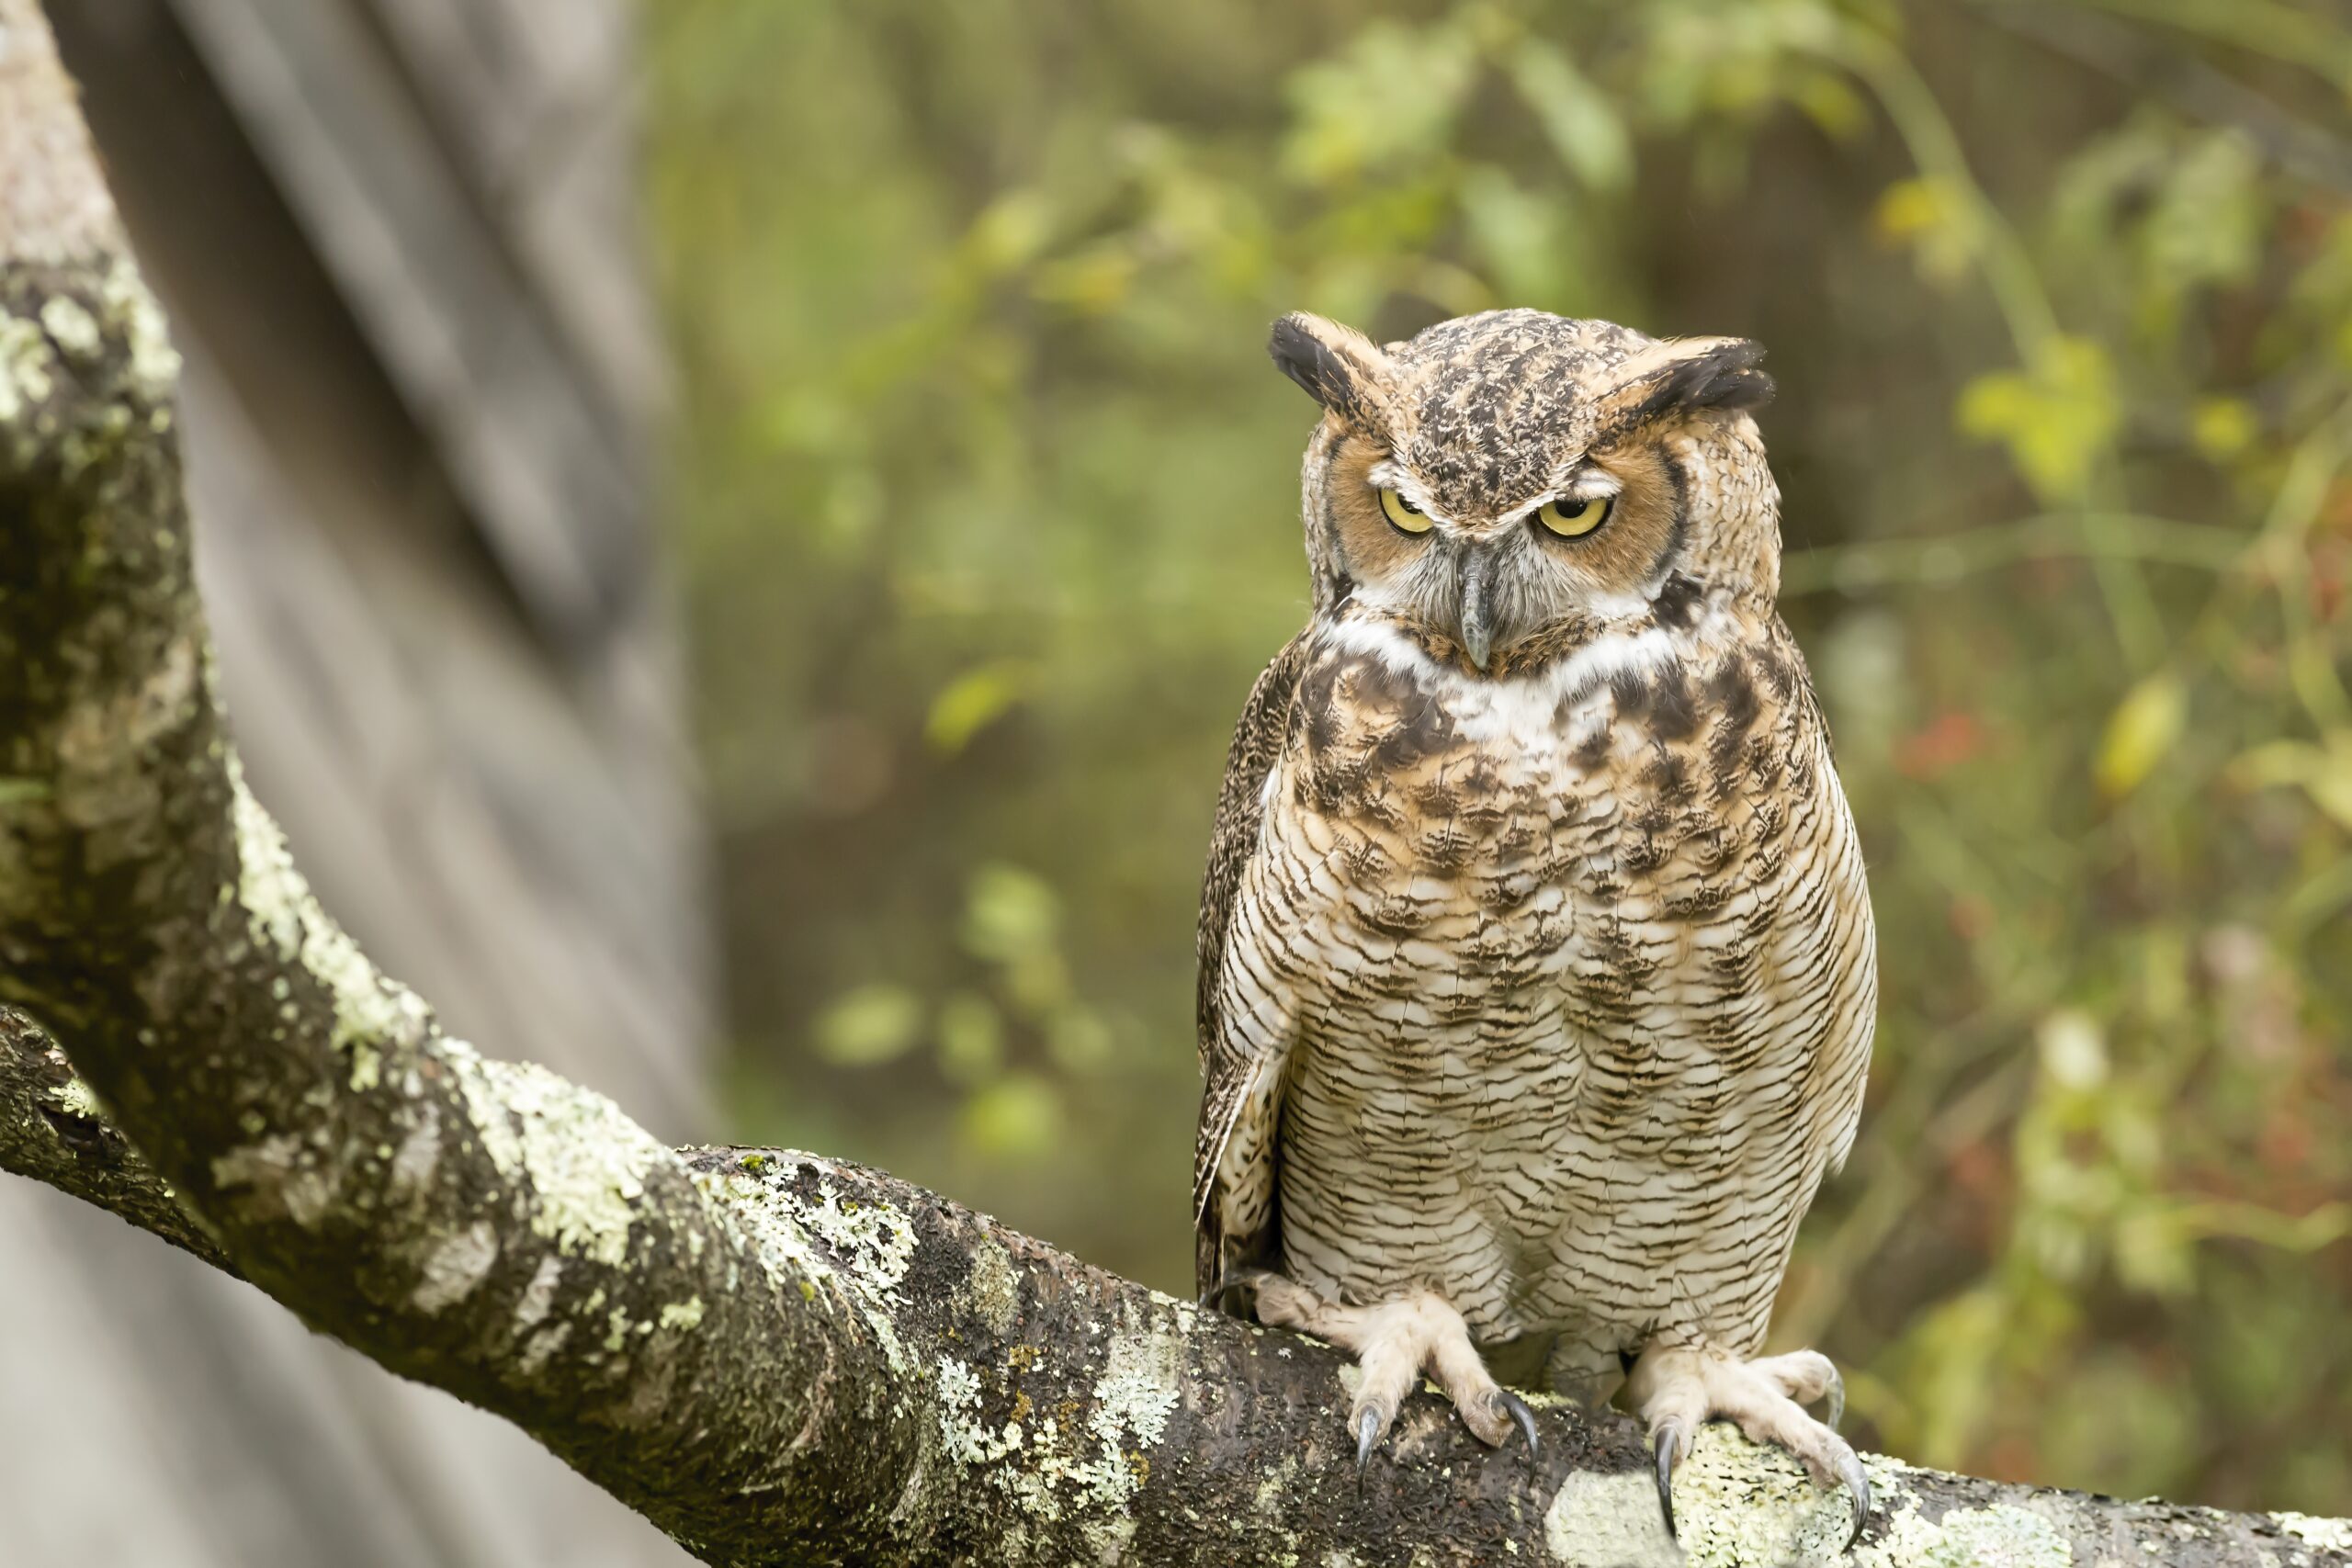 Wild-About-Raptors-Brentwood-Event_Owls-HIll_Great-Horned-Owl